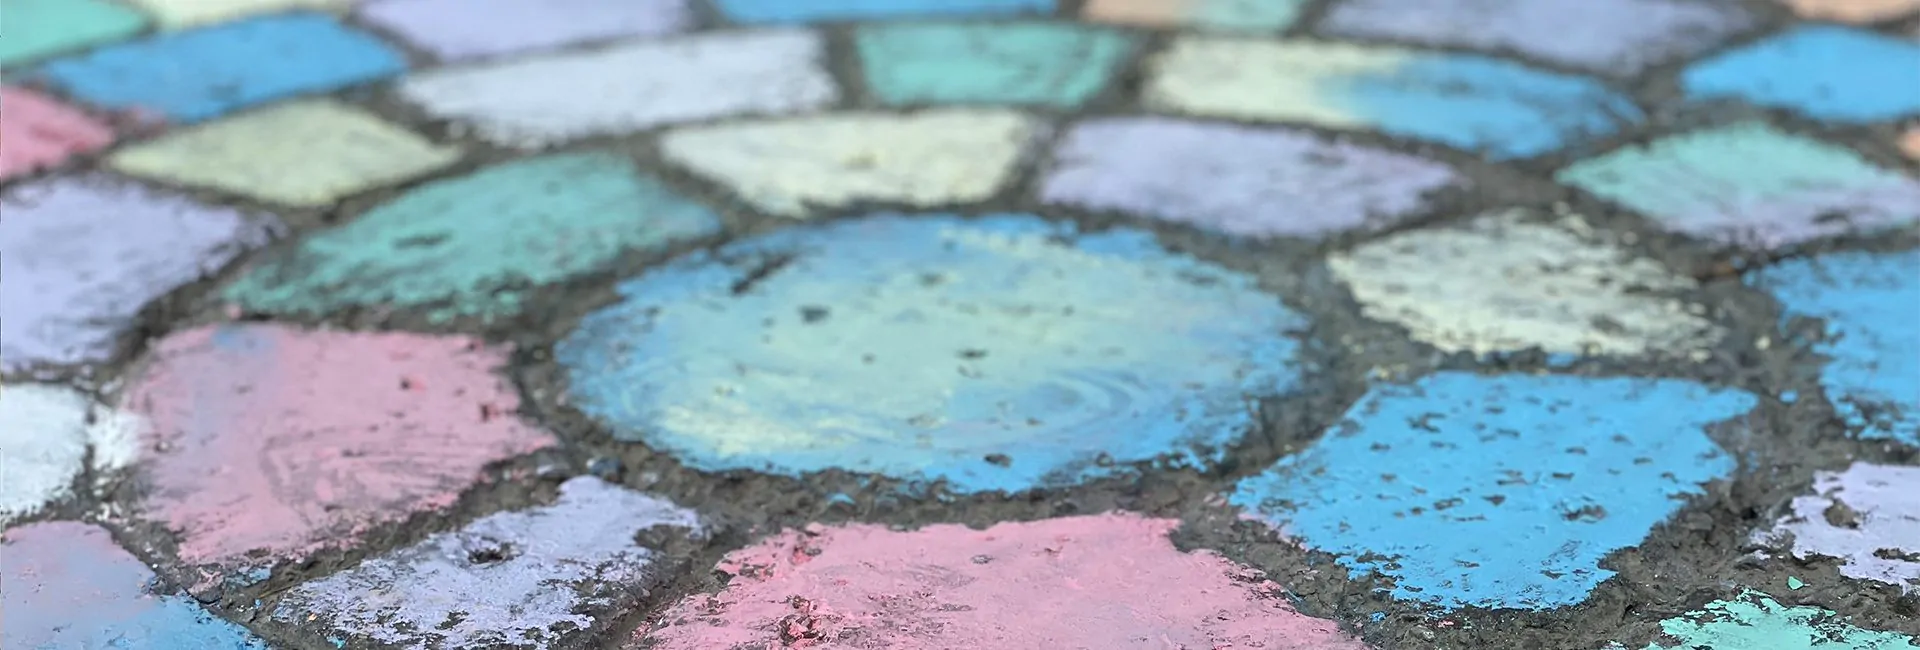 stone-path-painted-in-chalk